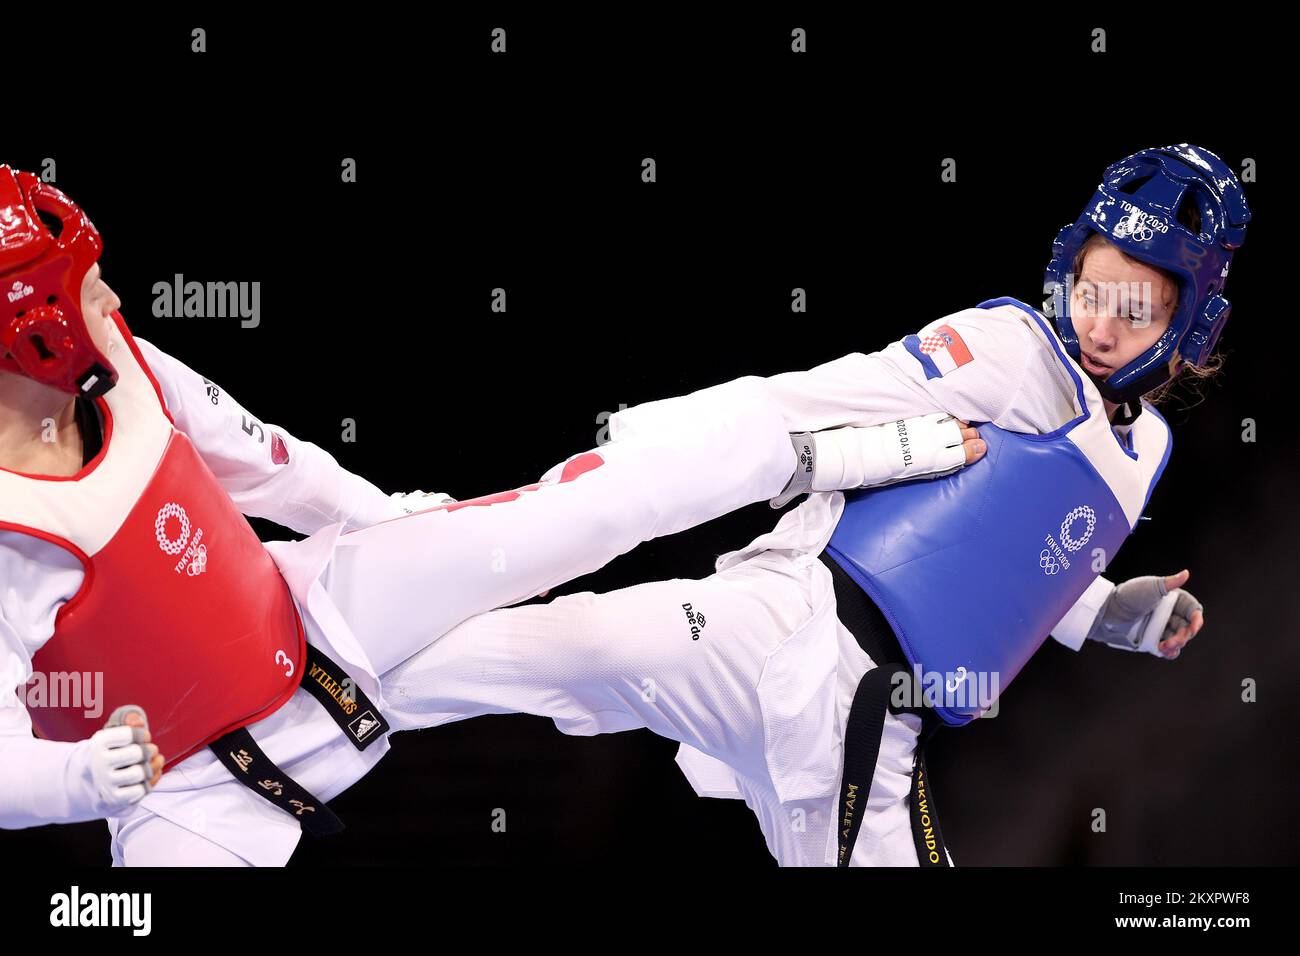 Matea Jelic (R) of Croatia competes against Lauren Williams of Great Britain during the Women's -67kg Taekwondo Final on day three of the Tokyo 2020 Olympic Games at Makuhari Messe Hall on July 26, 2021 in Chiba, Japan. Stock Photo